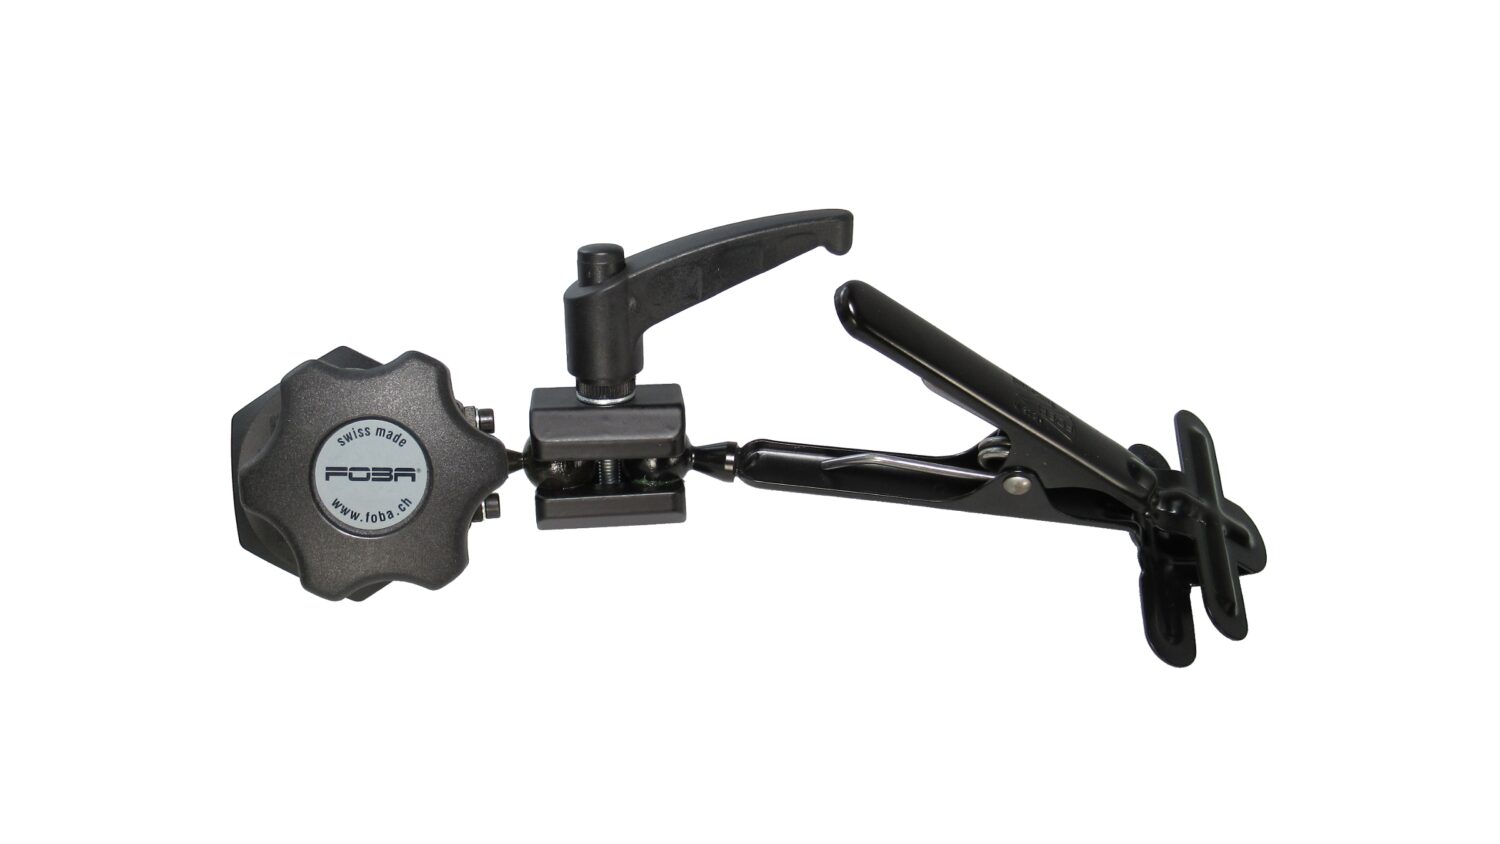 FOBA strong clamp with combitube mounting